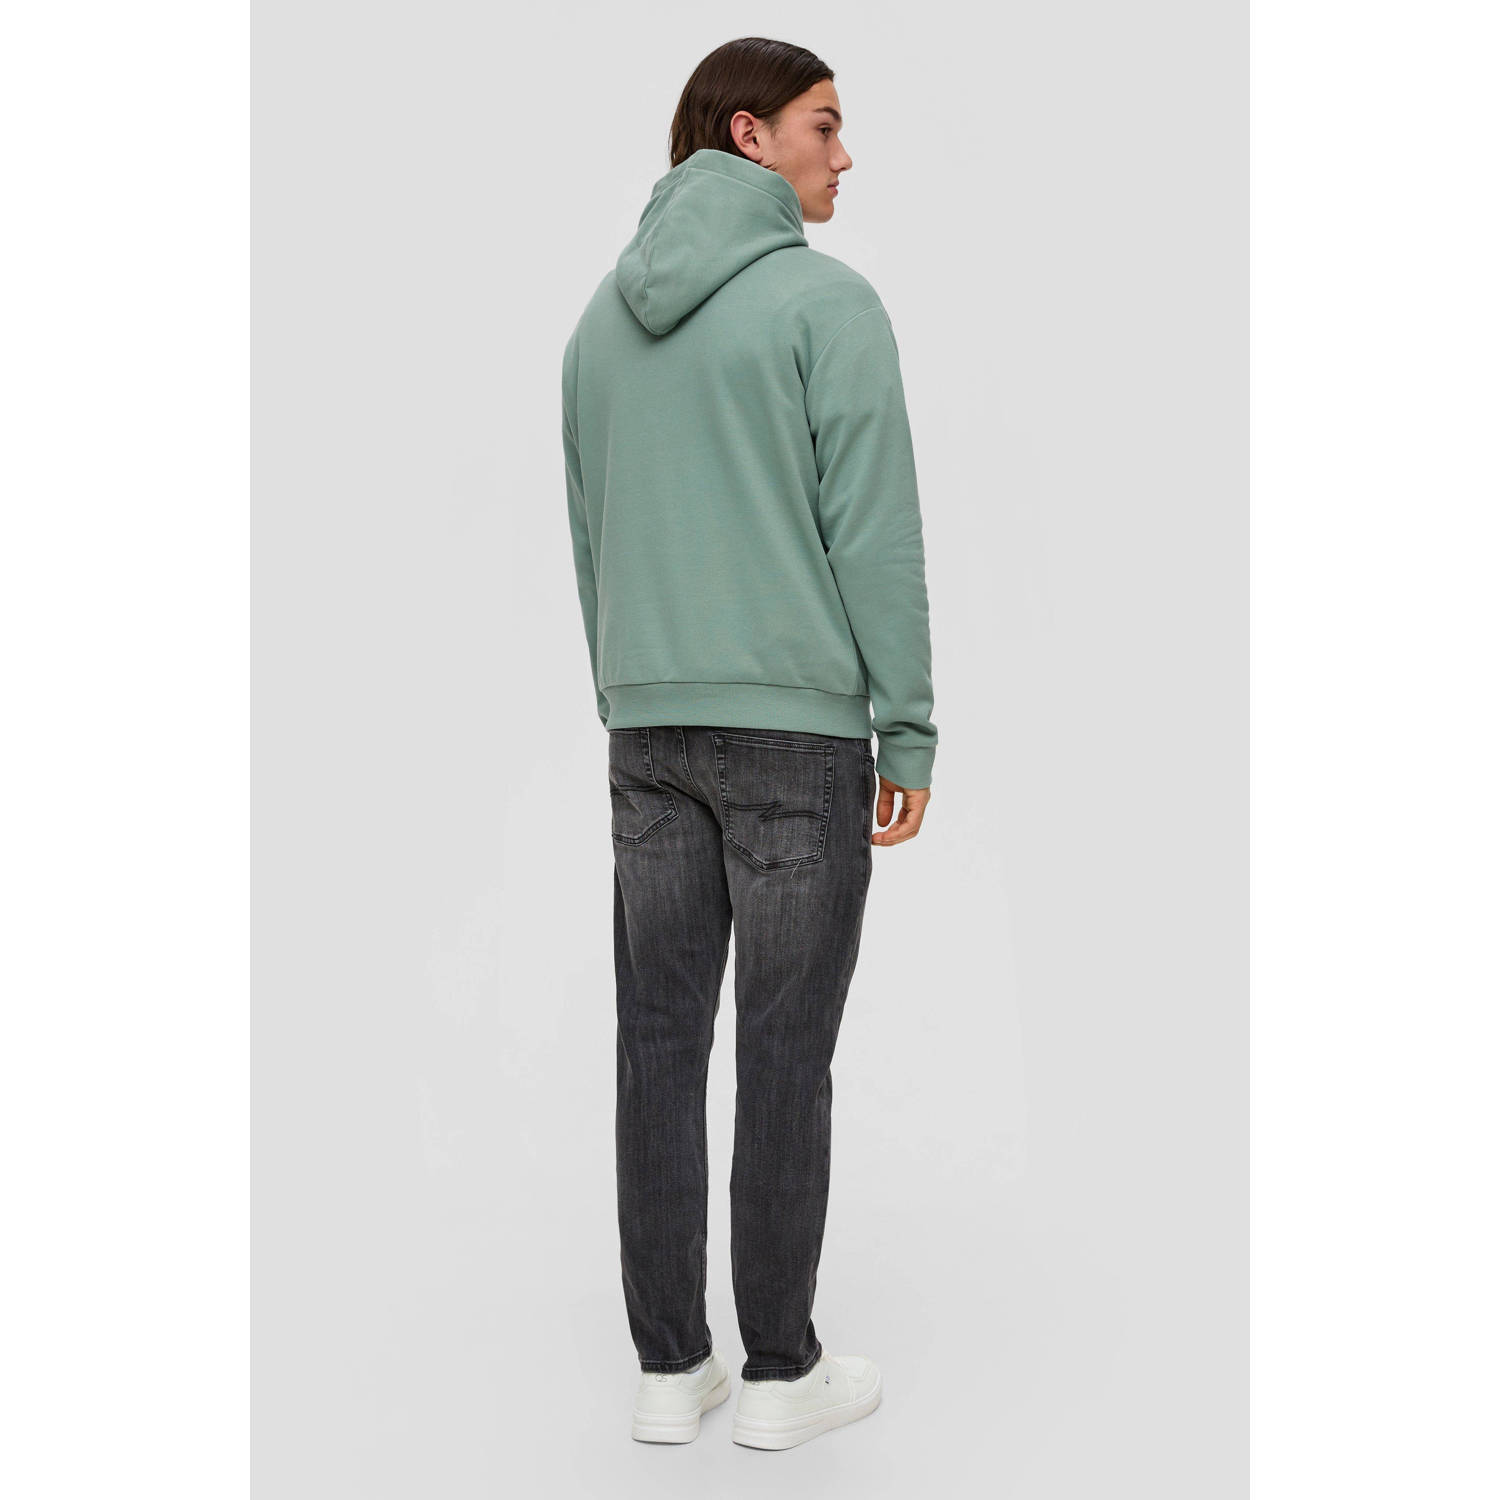 Q S by s.Oliver hoodie groen